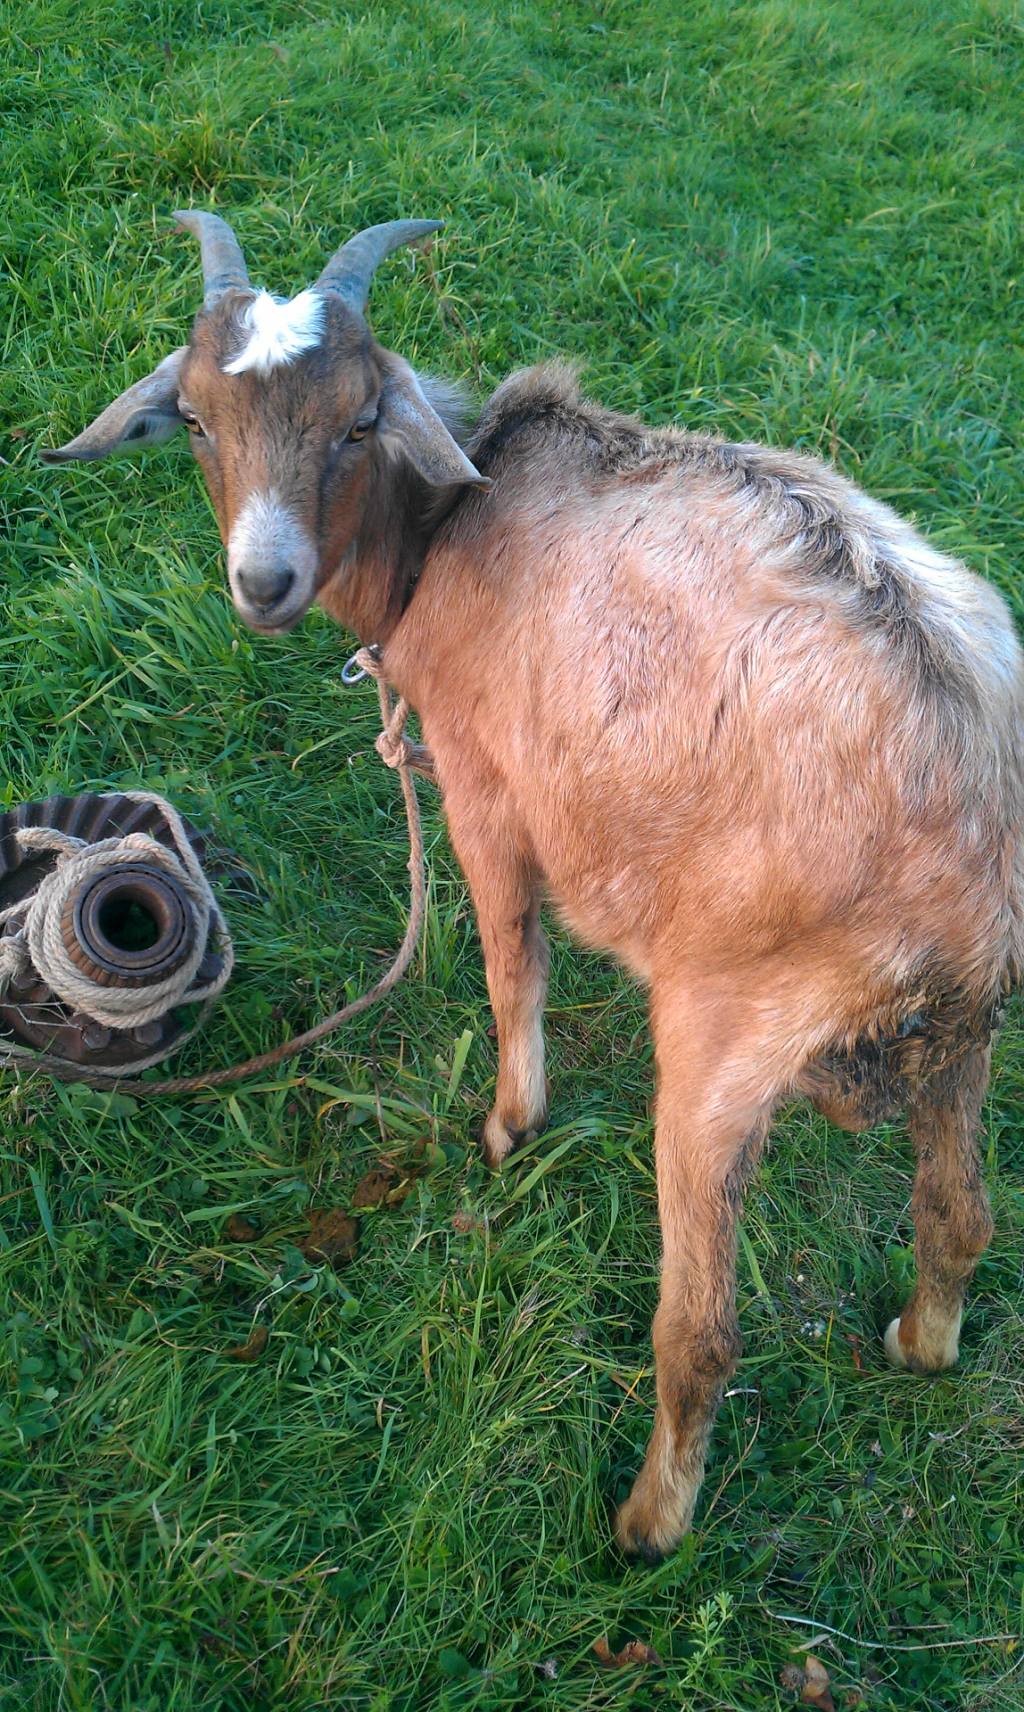 Strongyloides Infection in Goats